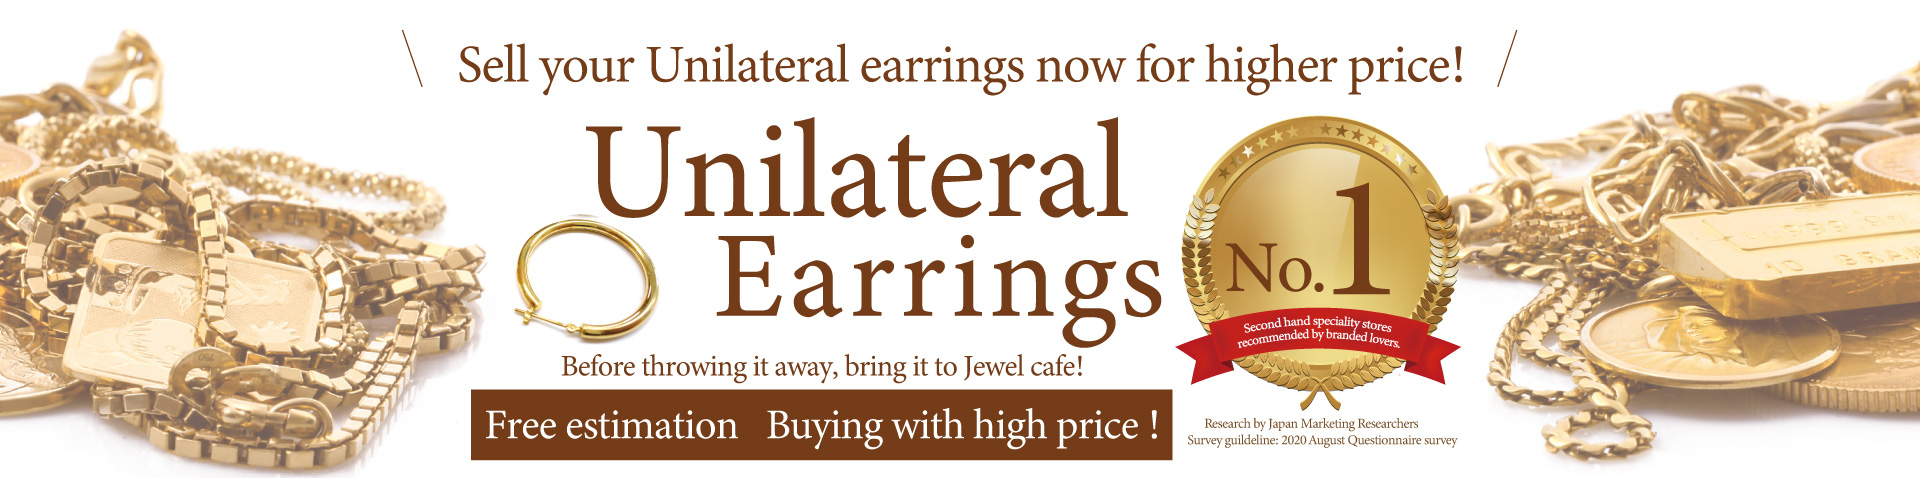 Jewel Cafe offers easy and speedy purchase at the store! No charge for evaluation and consultation.